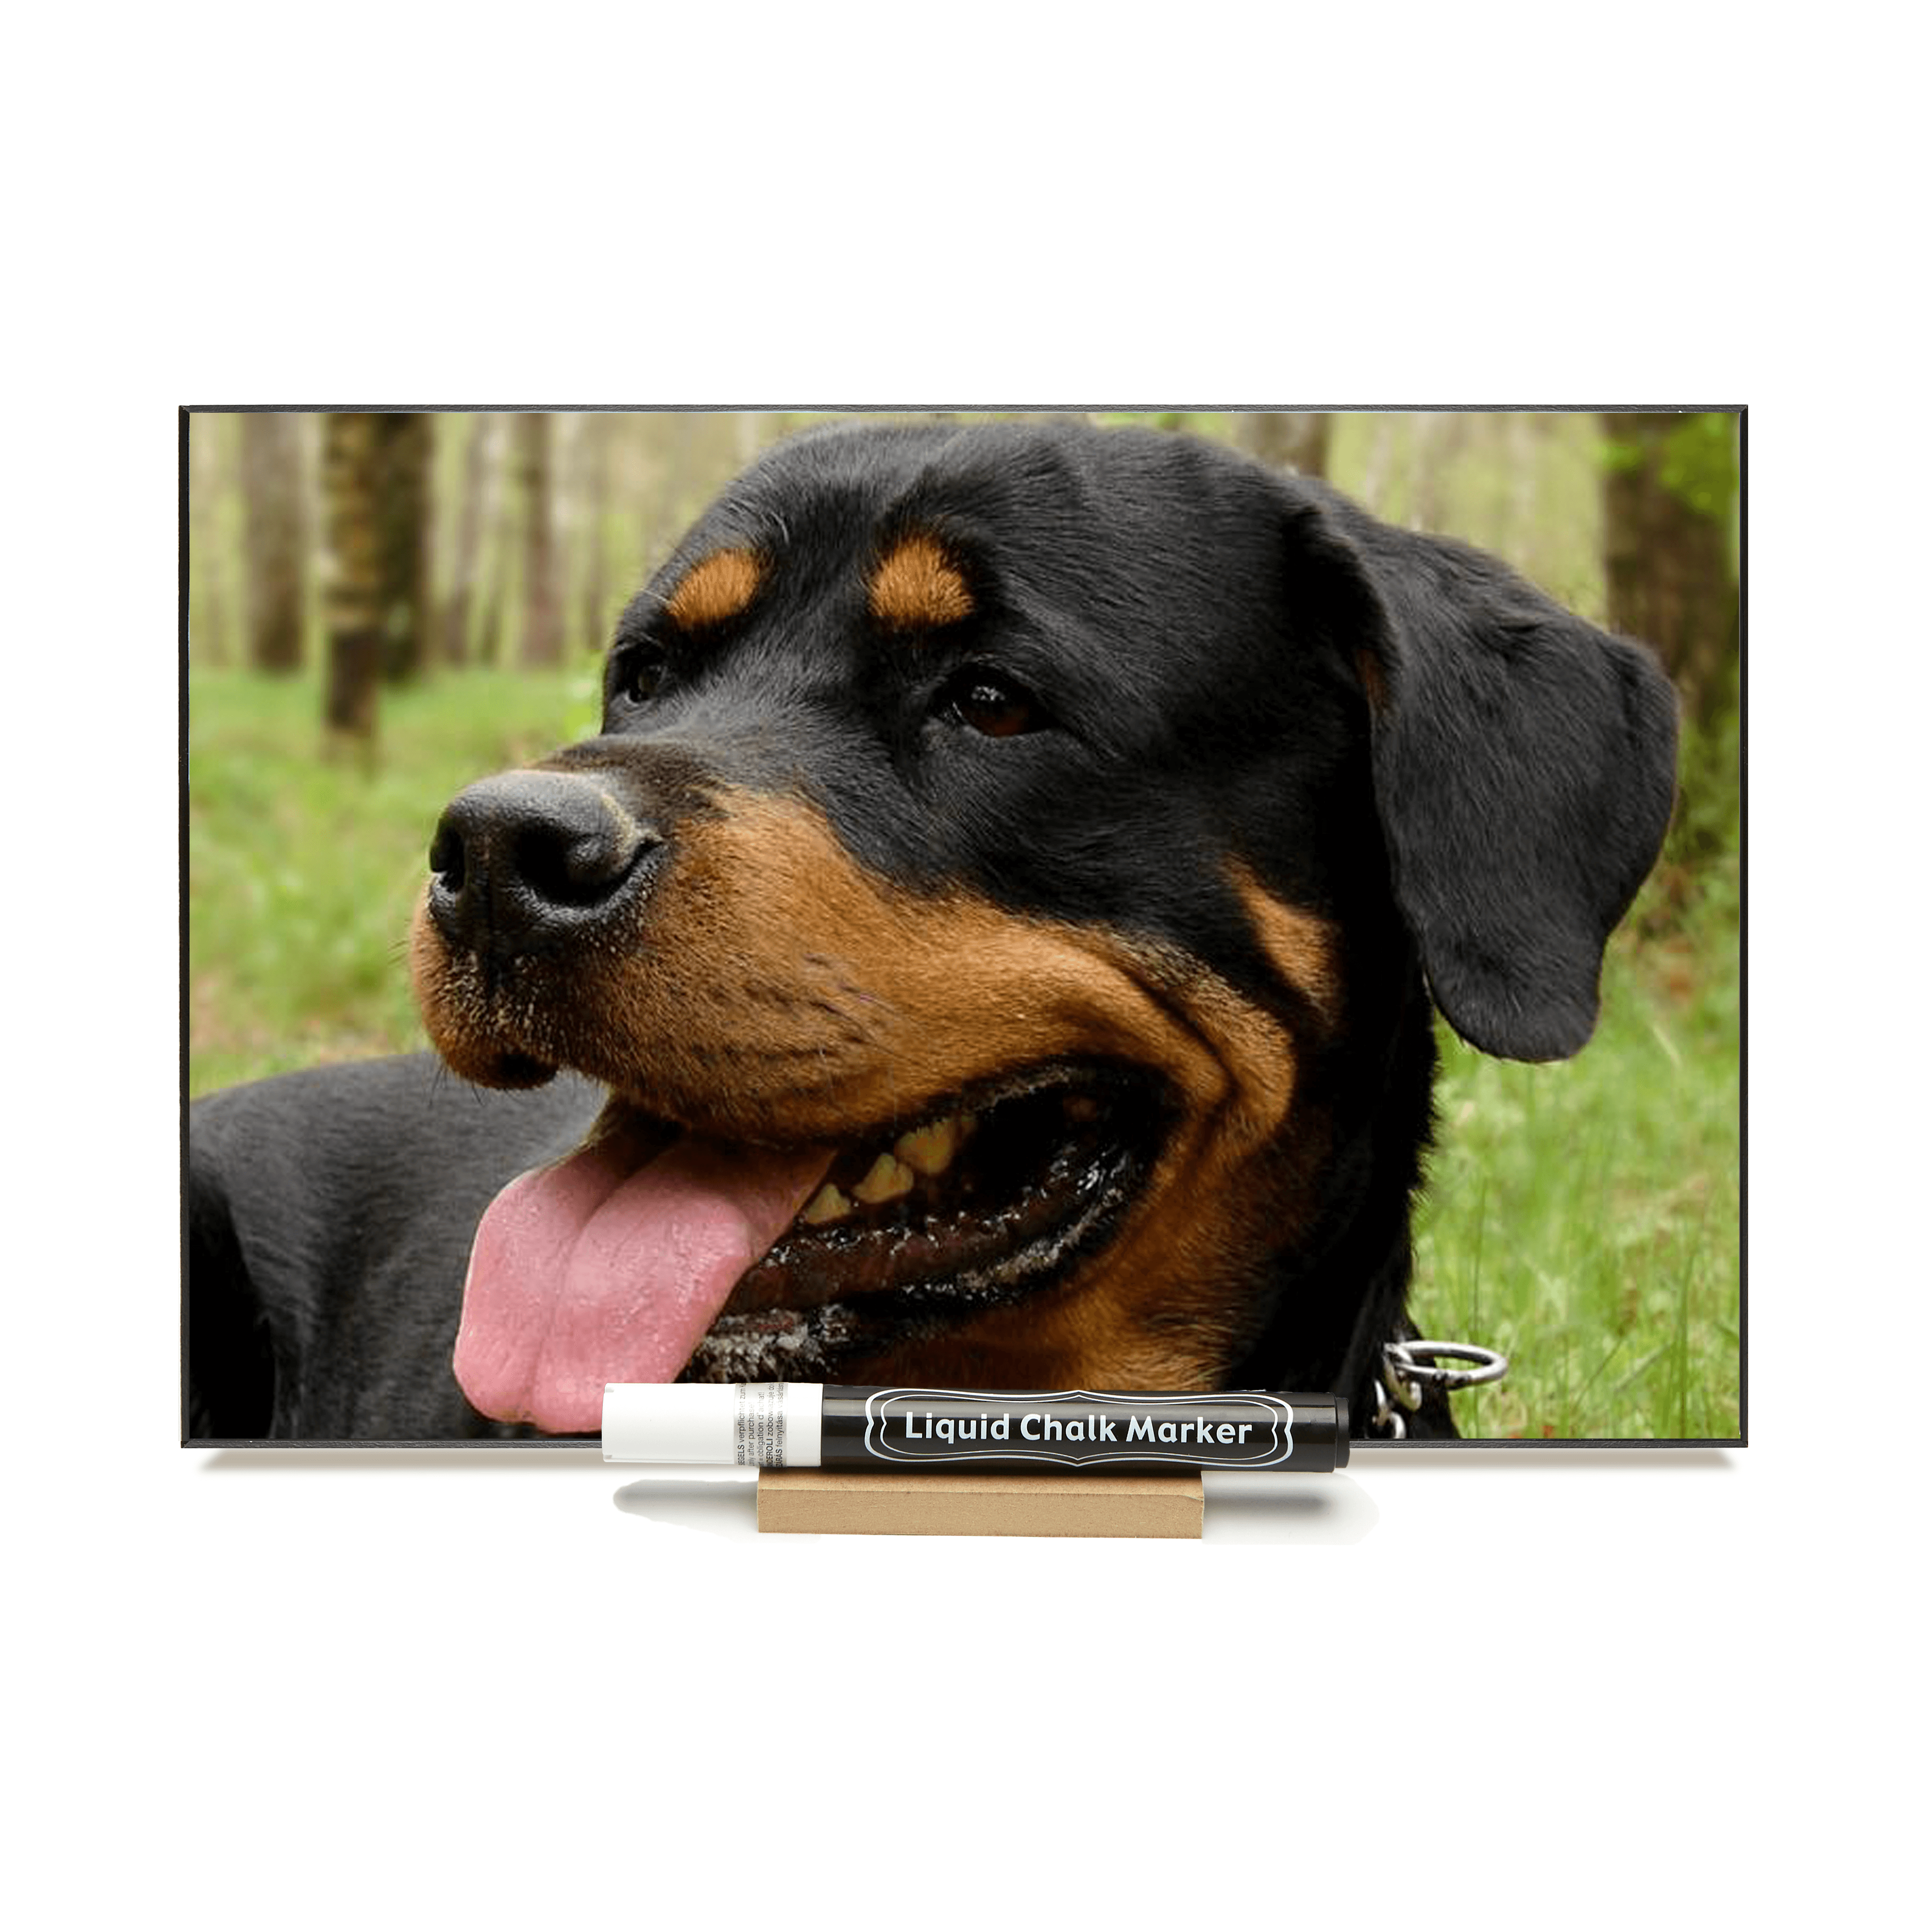 "Rottweiler"  PHOTO CHALKBOARD  Includes Chalkboard, Chalk Marker and Stand